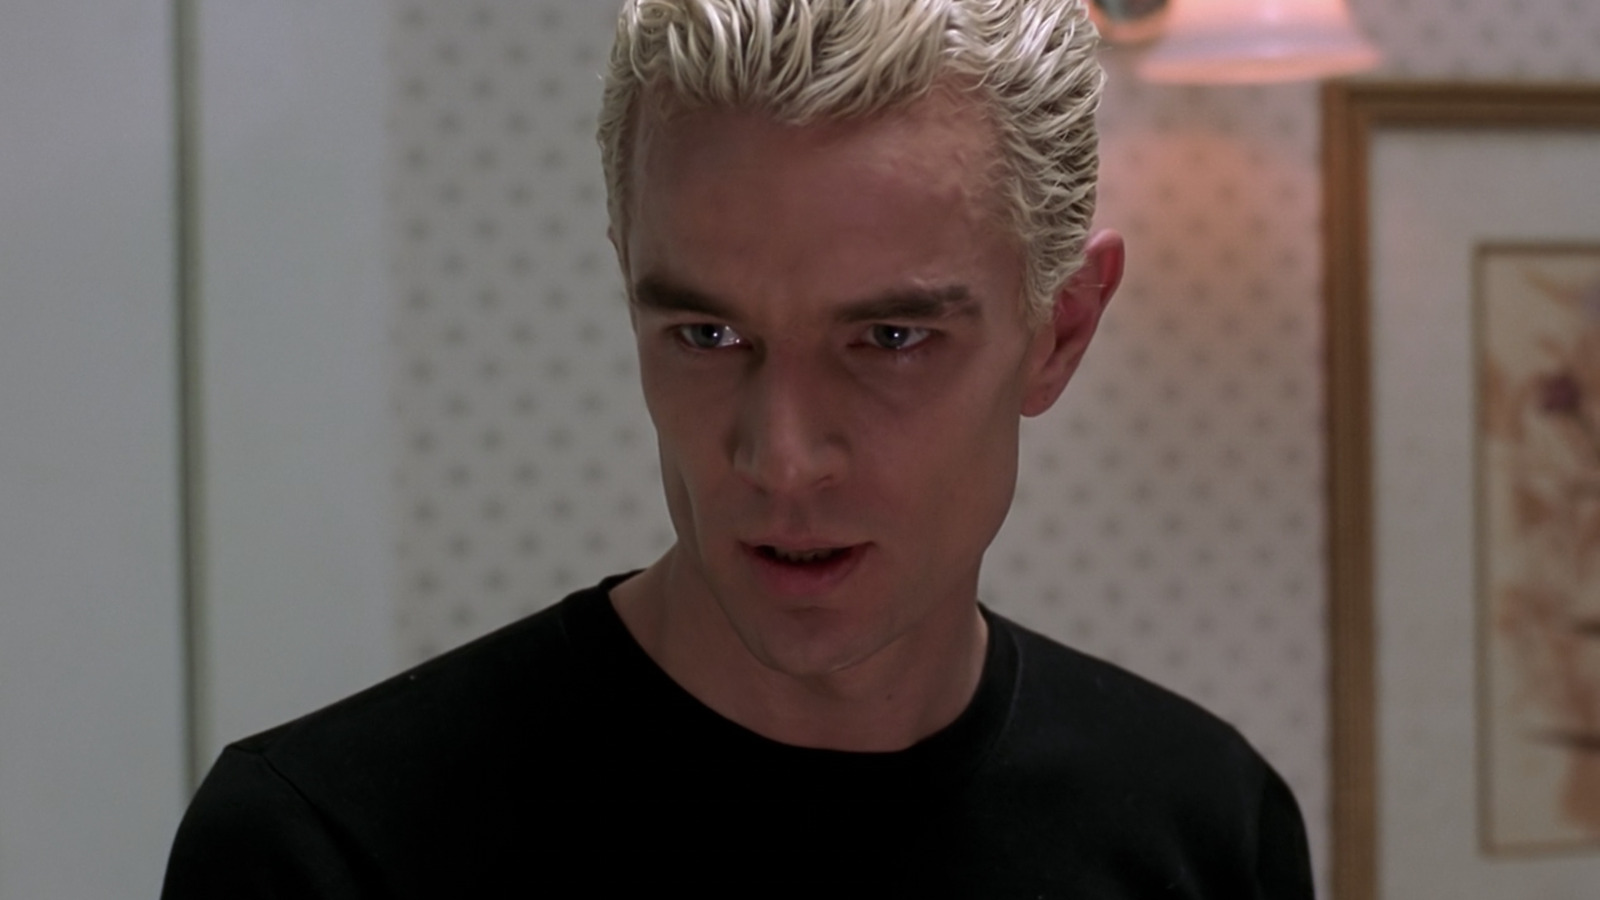 The Buffy Episode That Nearly Broke James Marsters